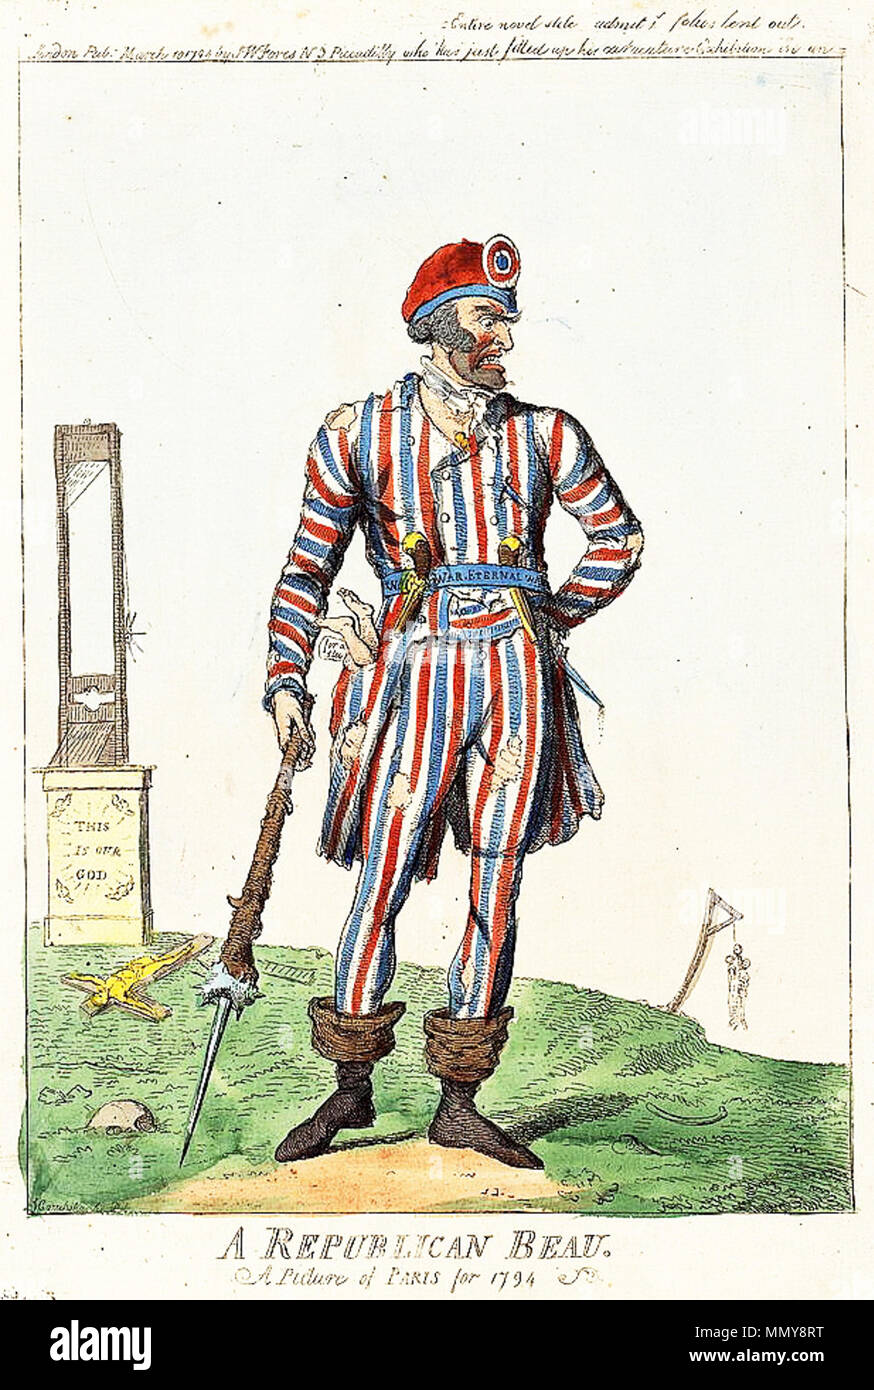 English: 'A Republican Beau. A Picture of Paris for 1794.' Hand-colored  etching by Isaac Cruikshank (1756-1811). LOC description: 'Print shows a  man, a sans-culottes, in ragged red, white, and blue stripe